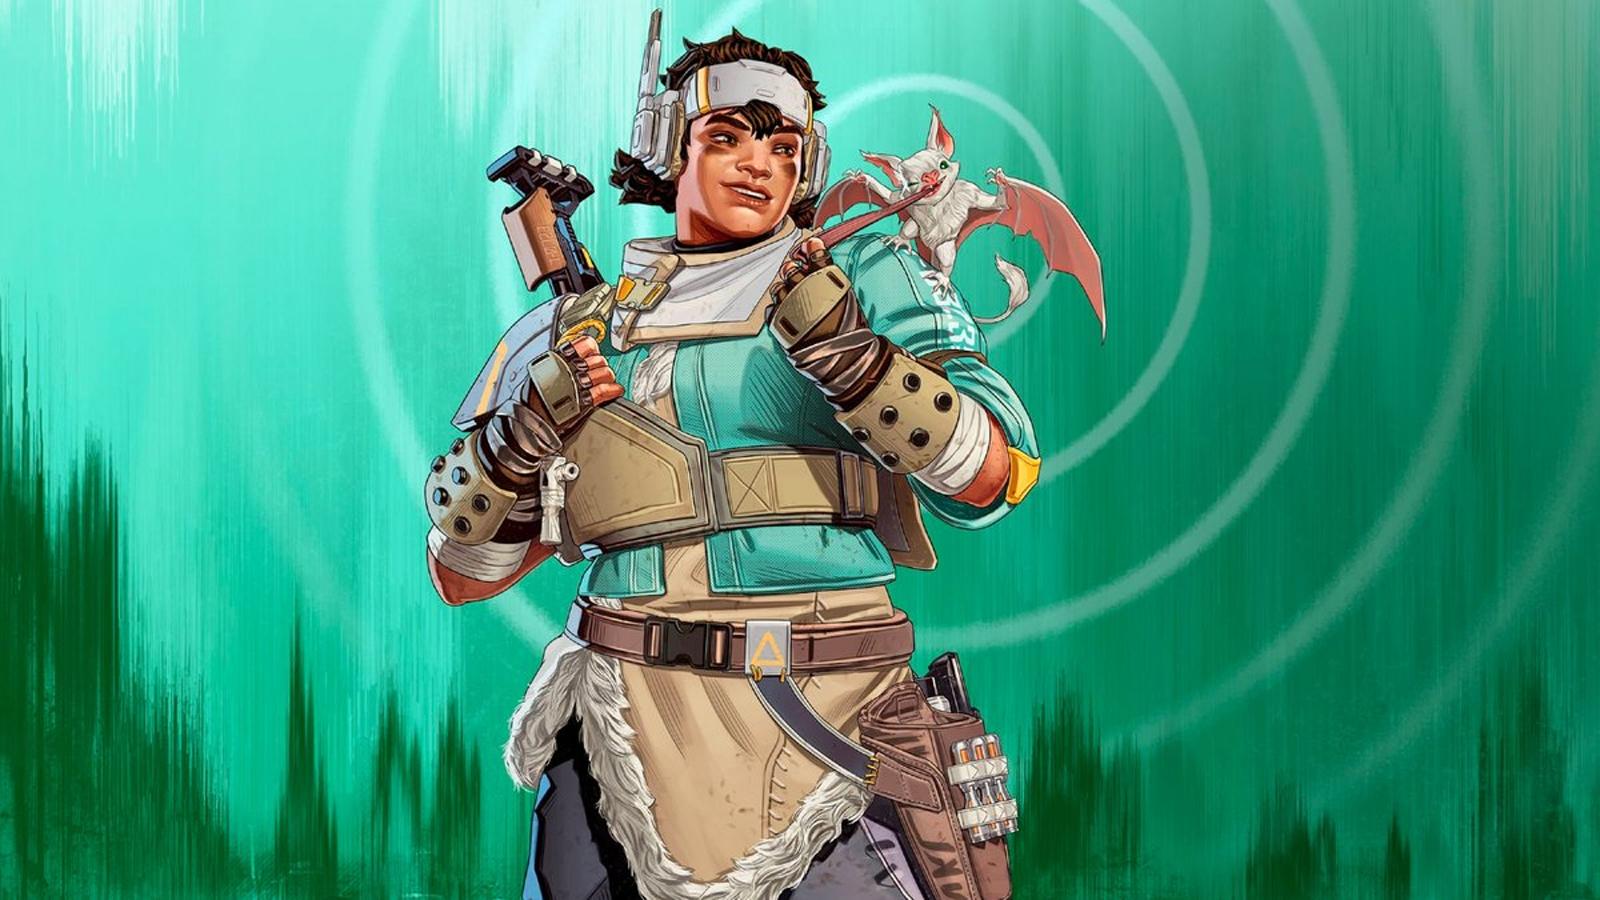 an image of Vantage in Apex Legends